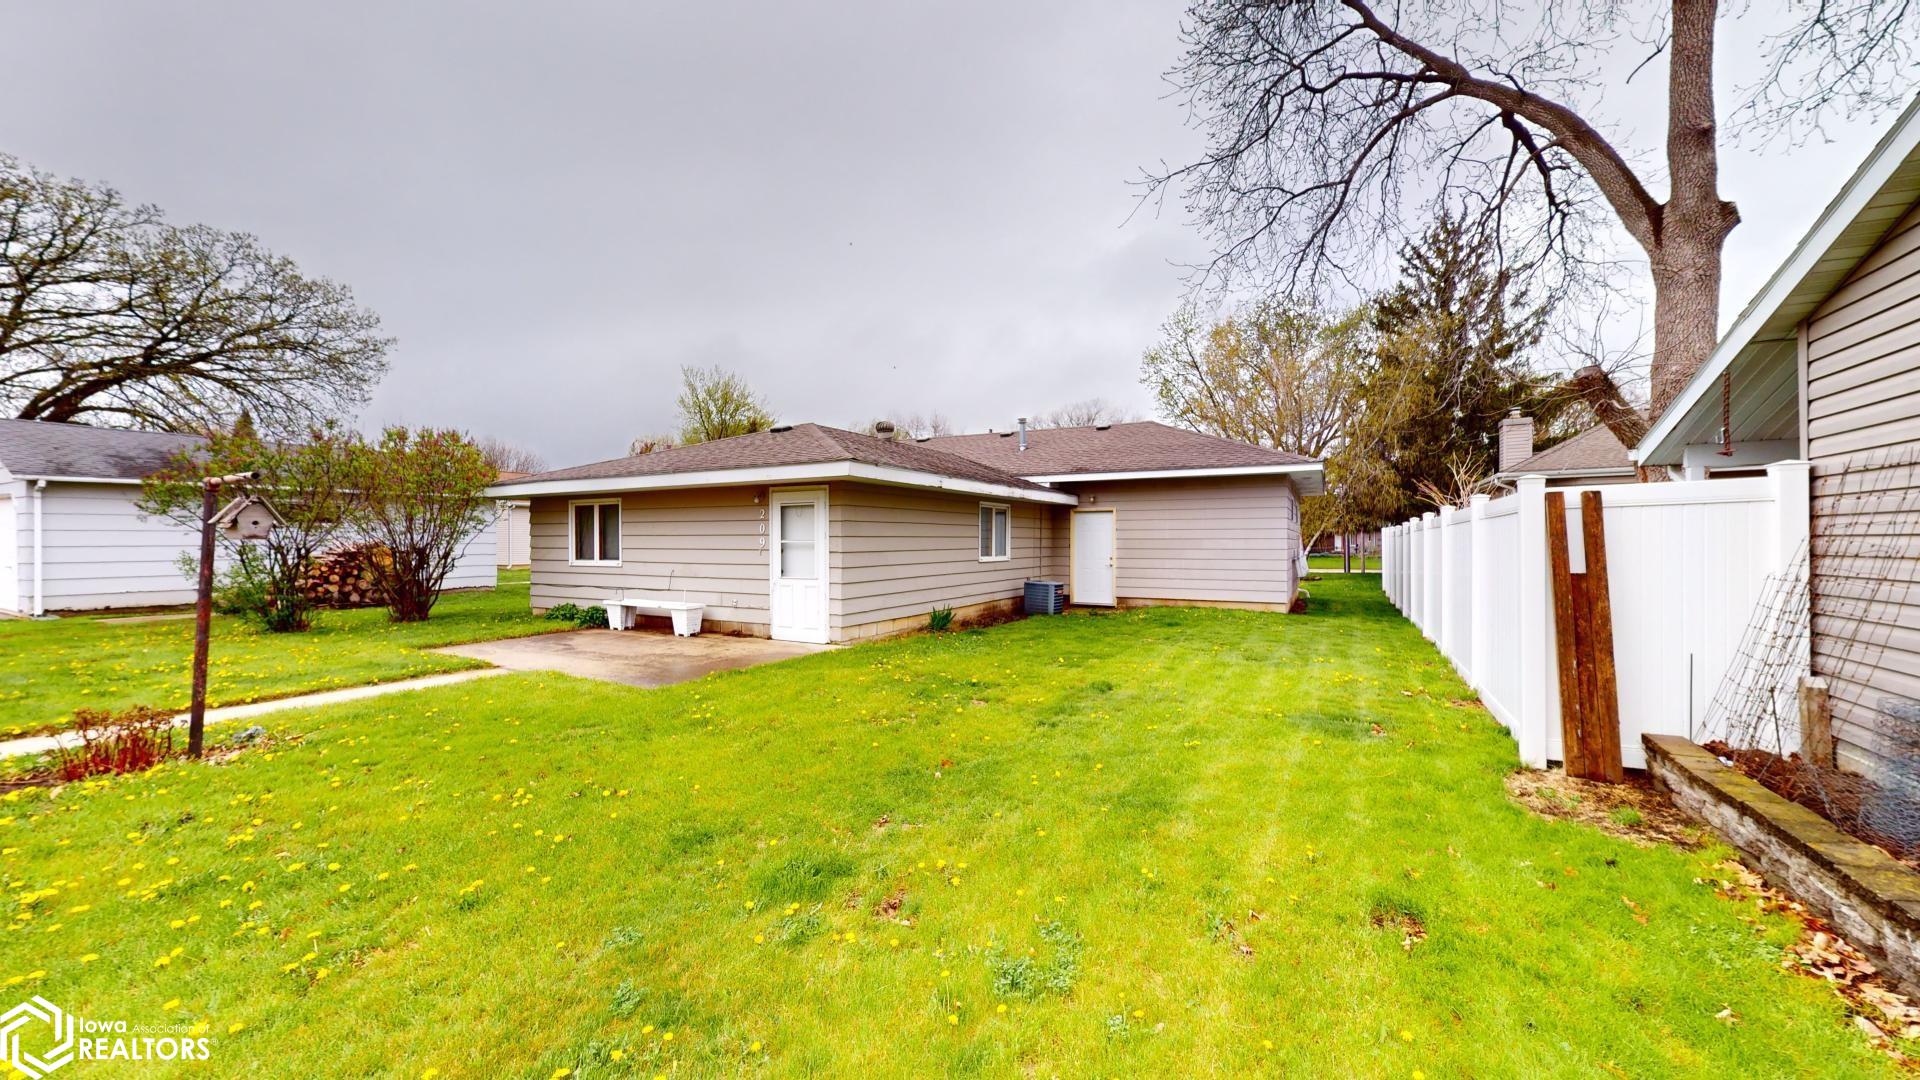 209 23Rd, Mason City, Iowa 50401, 2 Bedrooms Bedrooms, ,1 BathroomBathrooms,Single Family,For Sale,23Rd,6316790